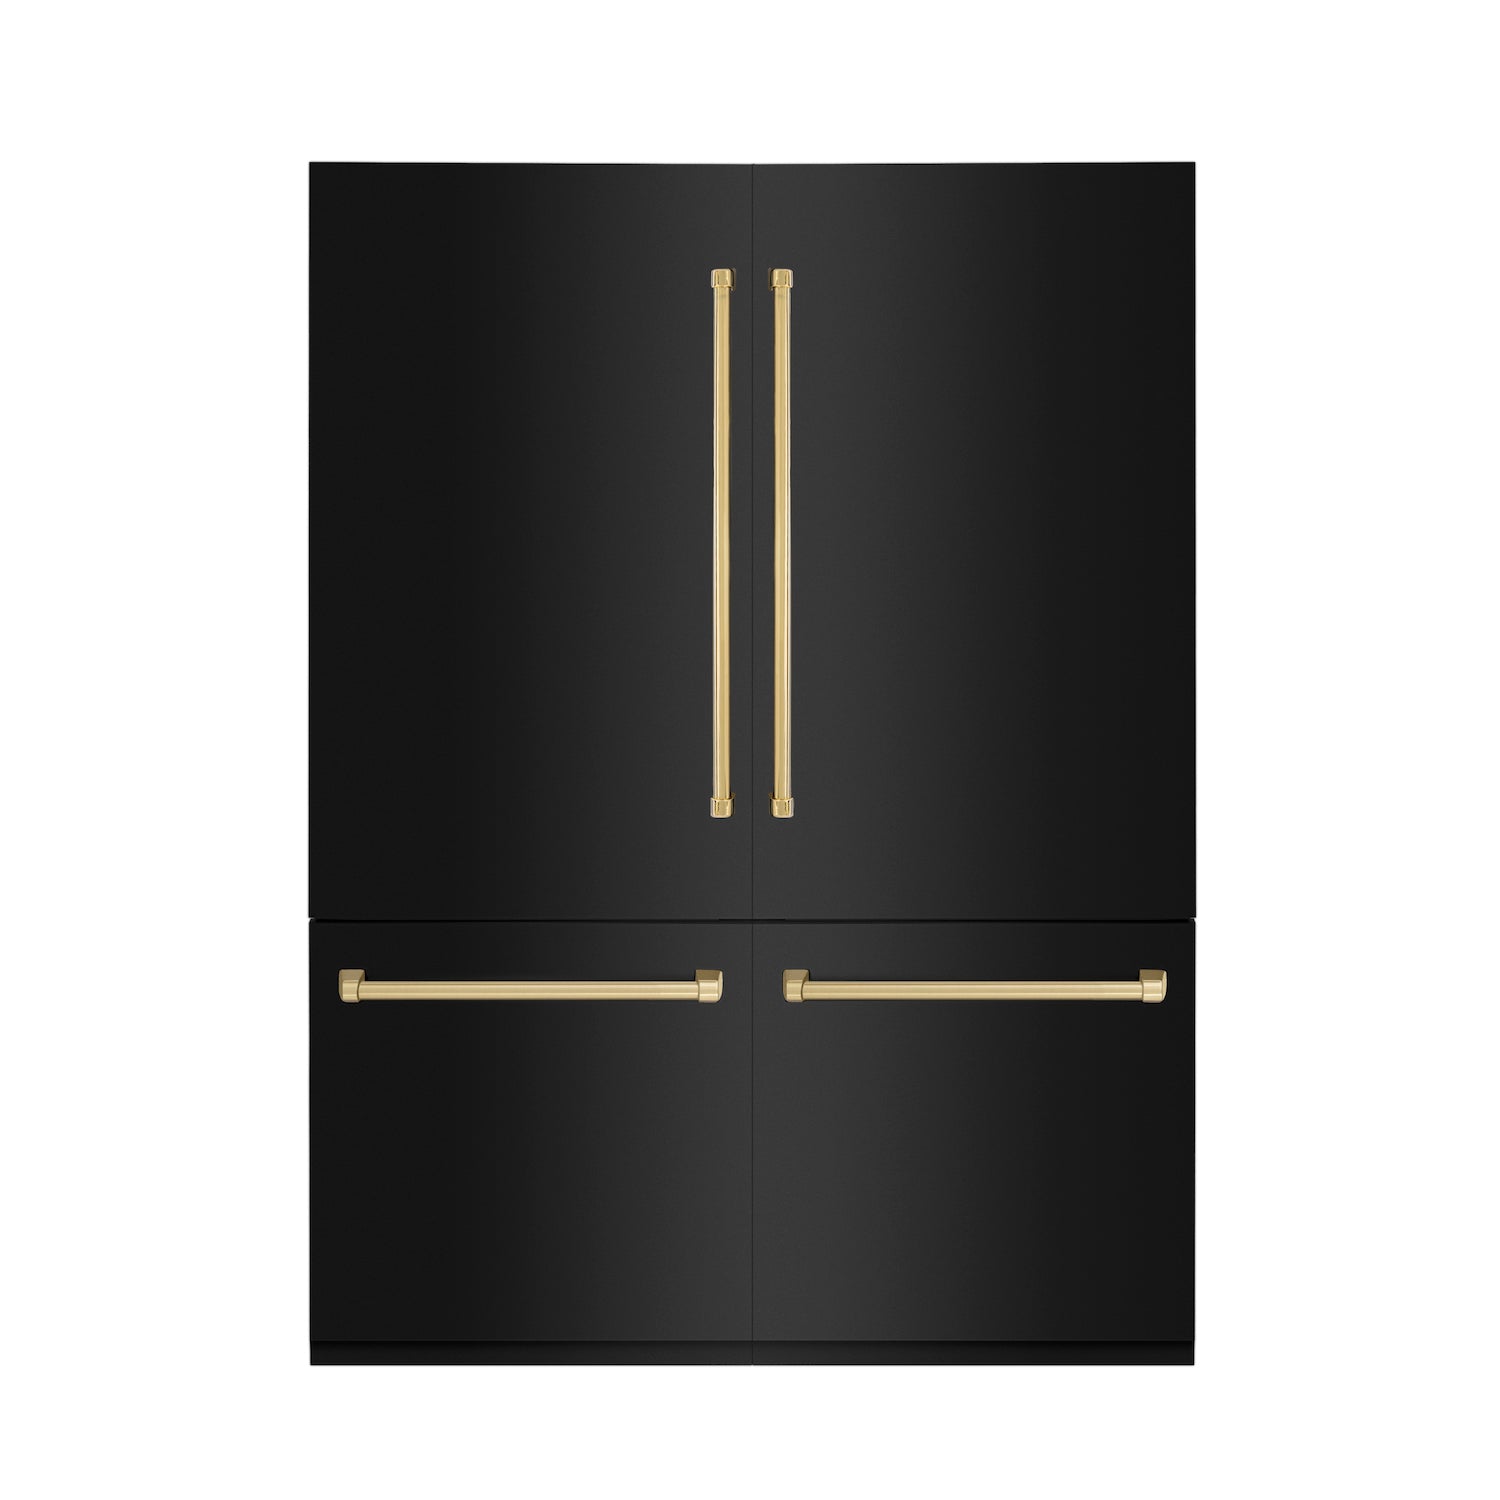 ZLINE Autograph Edition 60 in. 32.2 cu. ft. Built-in 4-Door French Door Refrigerator with Internal Water and Ice Dispenser in Black Stainless Steel with Polished Gold Accents (RBIVZ-BS-60-G) front, closed.